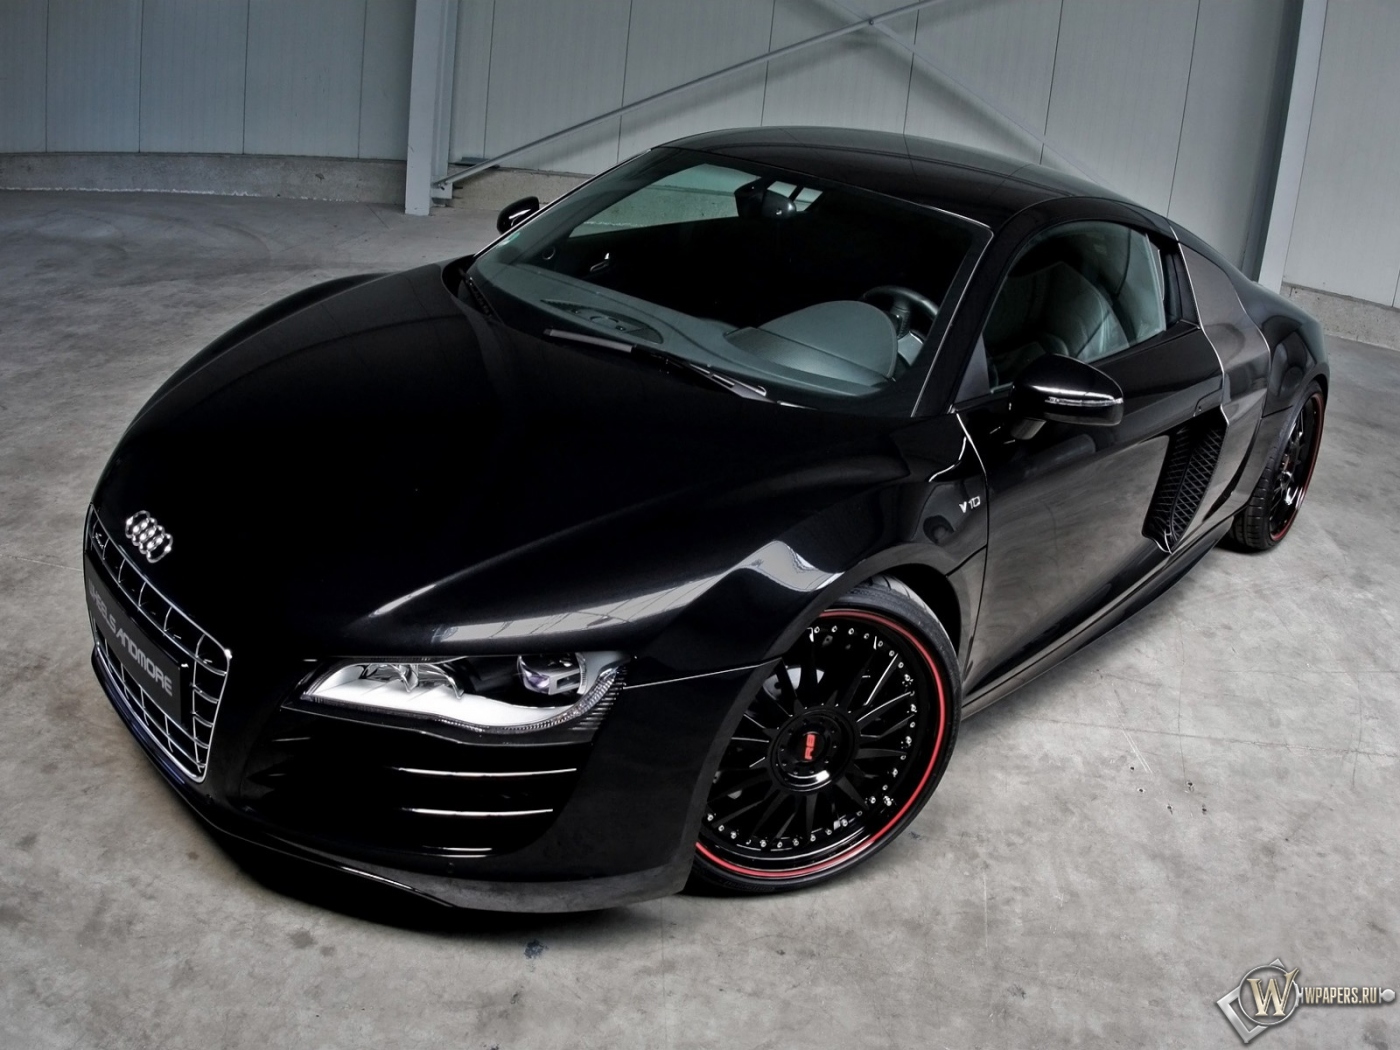 2011 Wheelsandmore Audi R8 V10 .6 - Front Angle Top 1400x1050